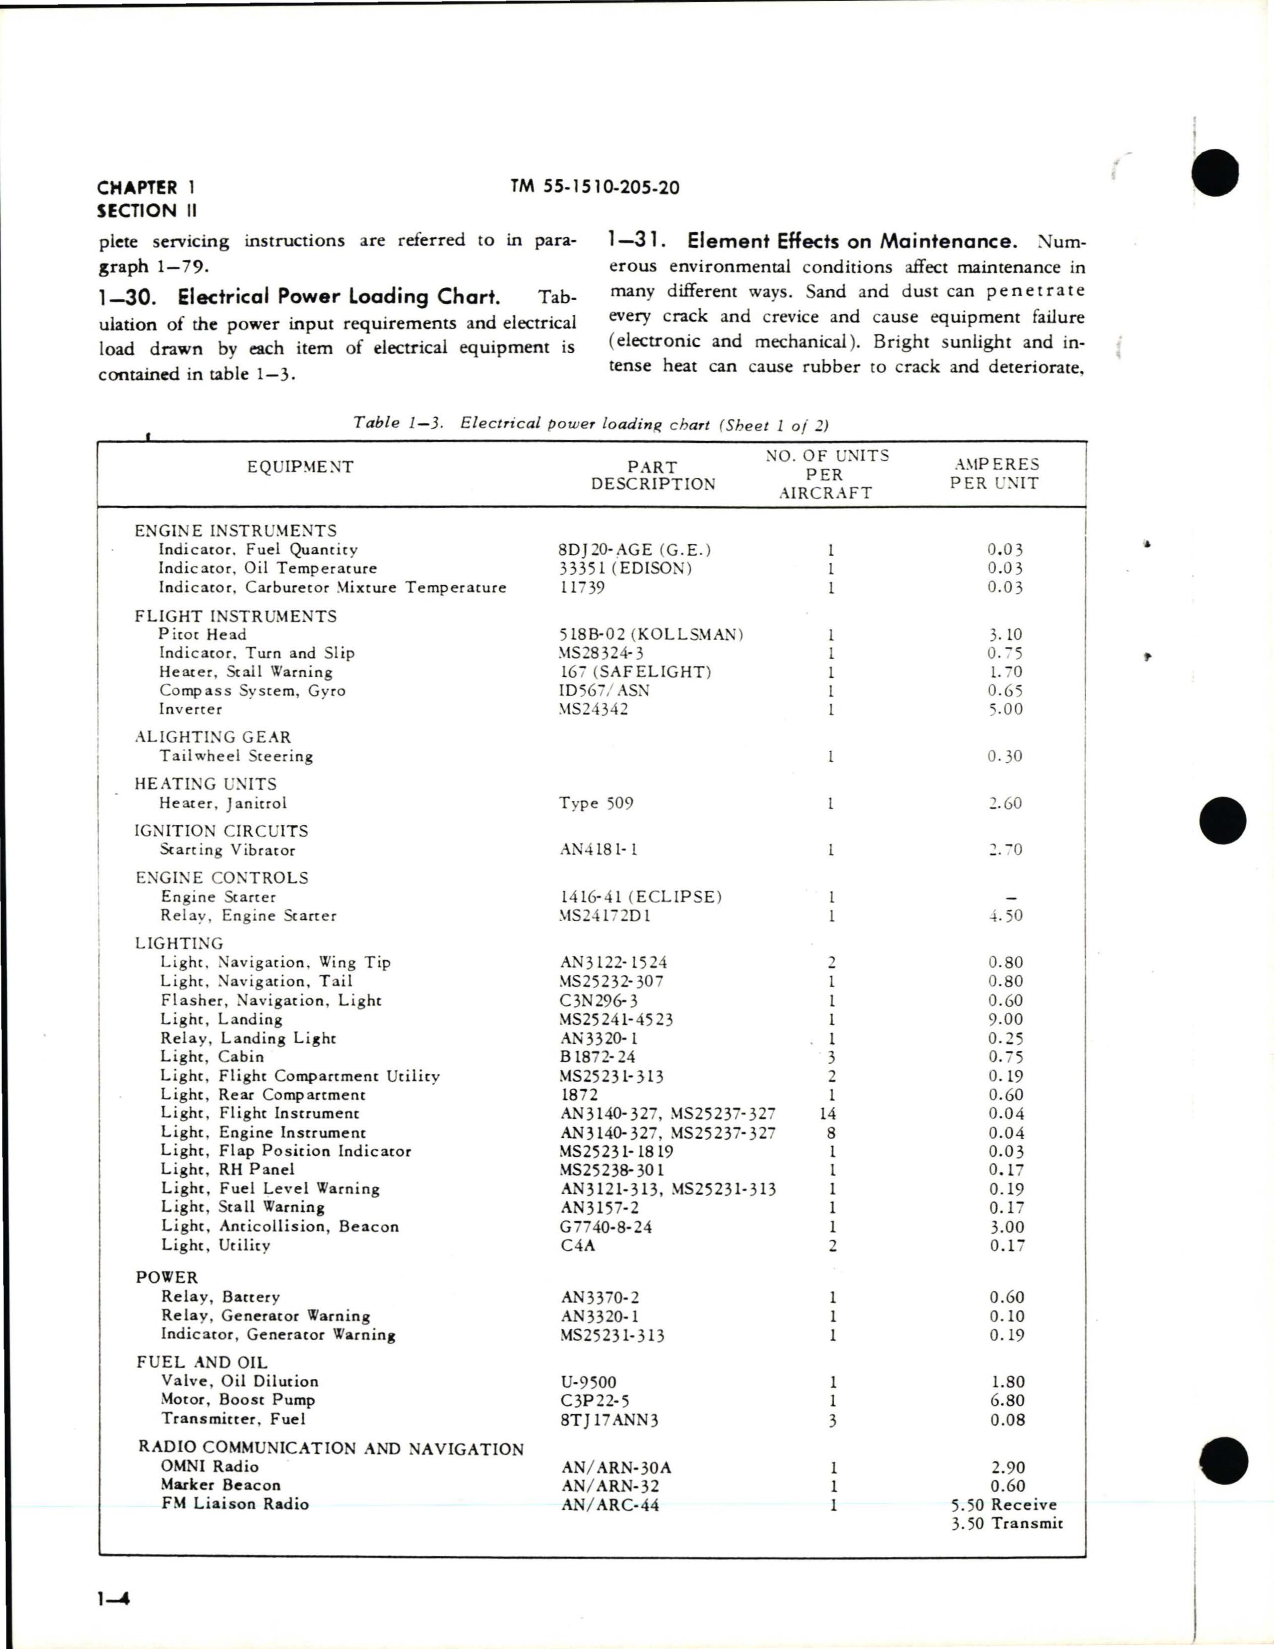 Sample page 8 from AirCorps Library document: Organizational Maintenance Manual for U-1A Otter